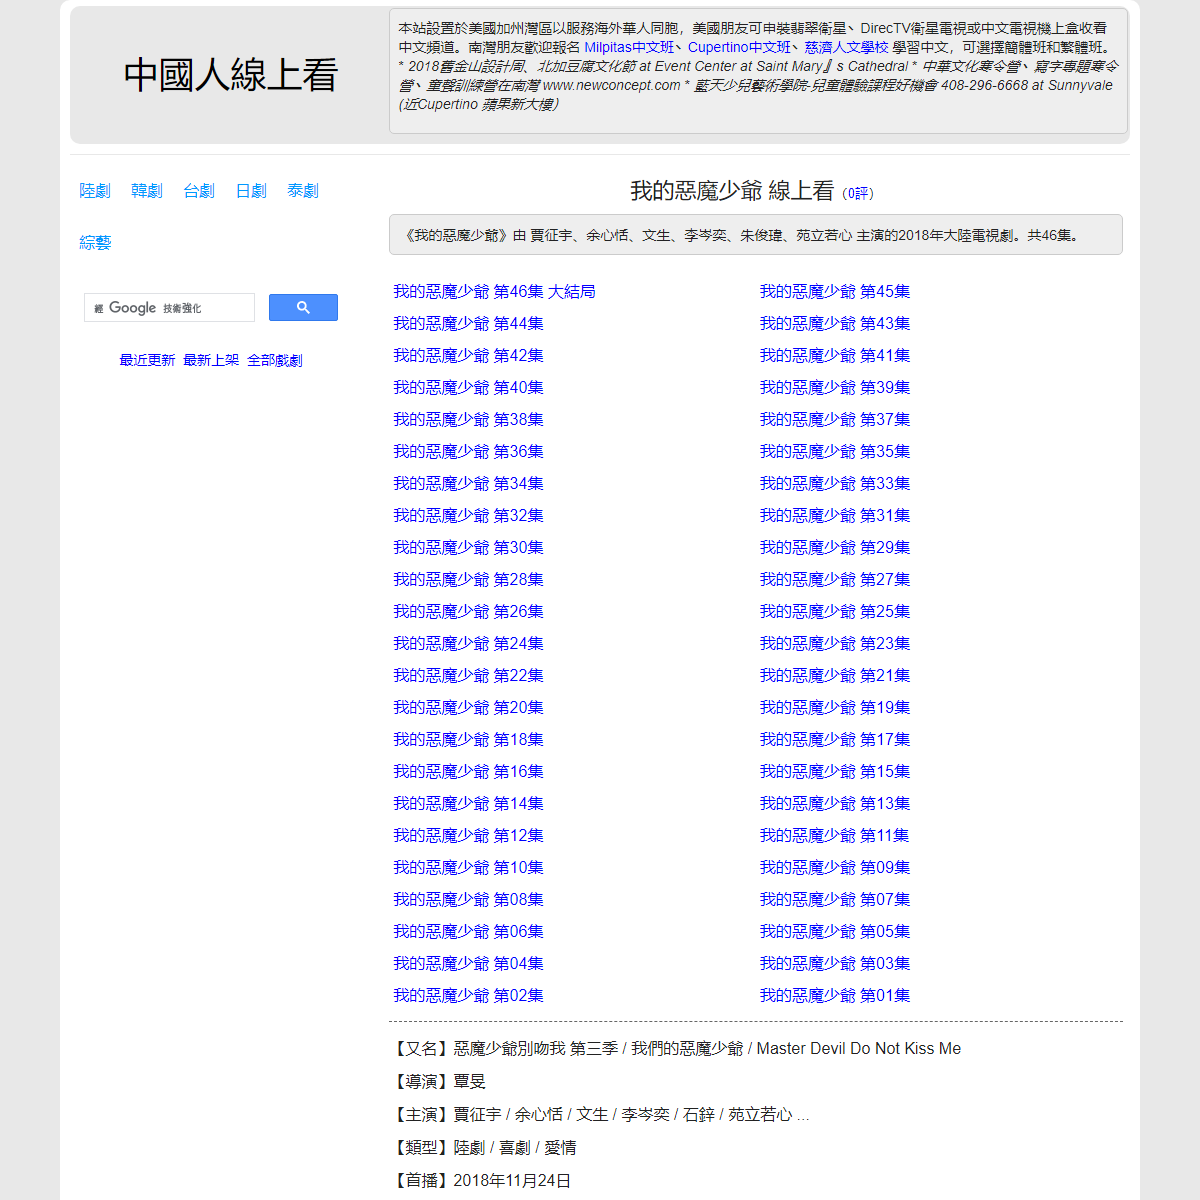 A complete backup of https://chinaq.tv/cn181124/